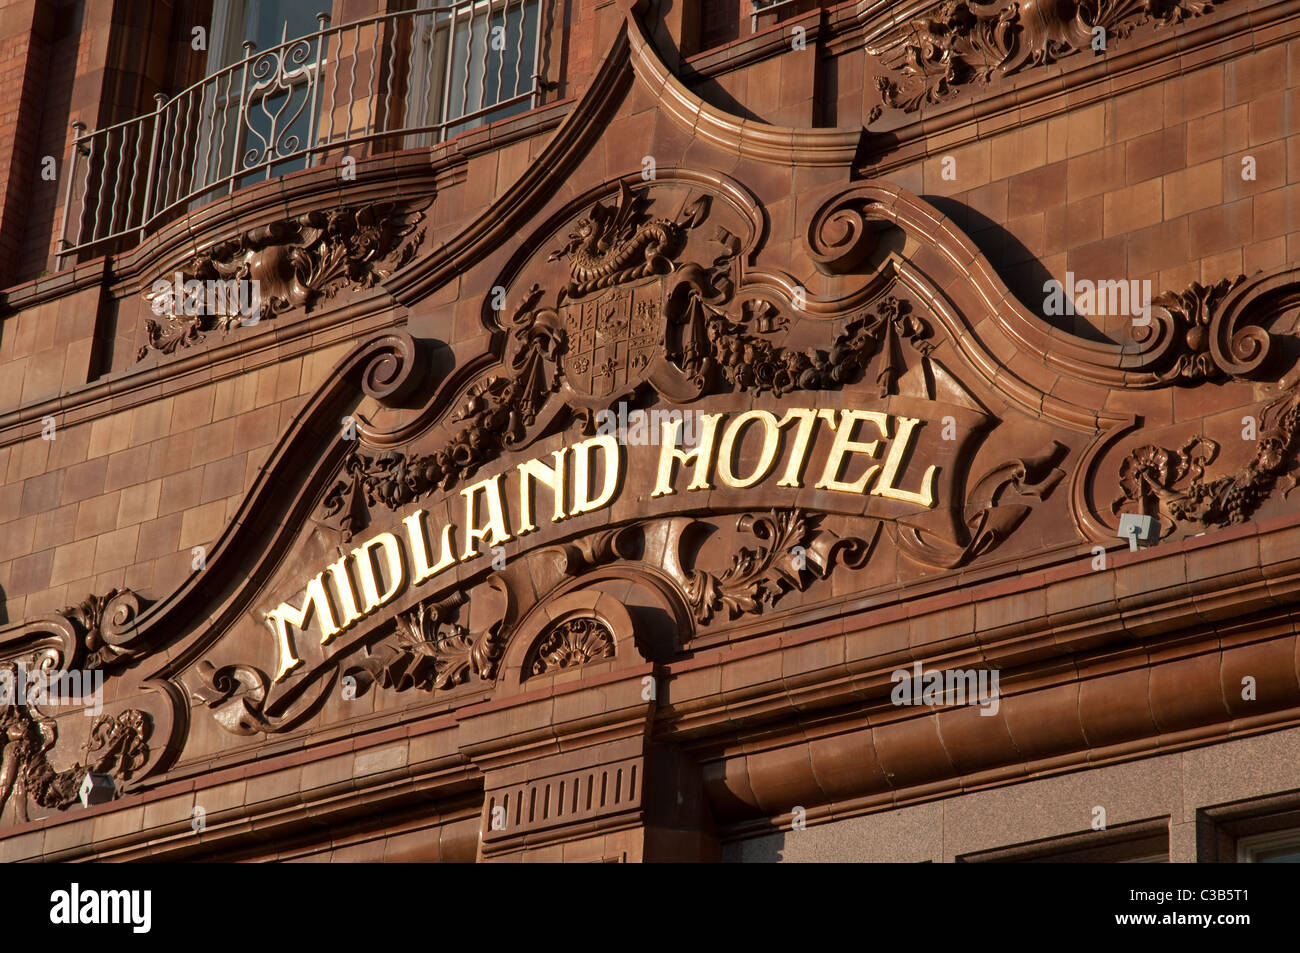 The Midland Hotel,Manchester. Stock Photo